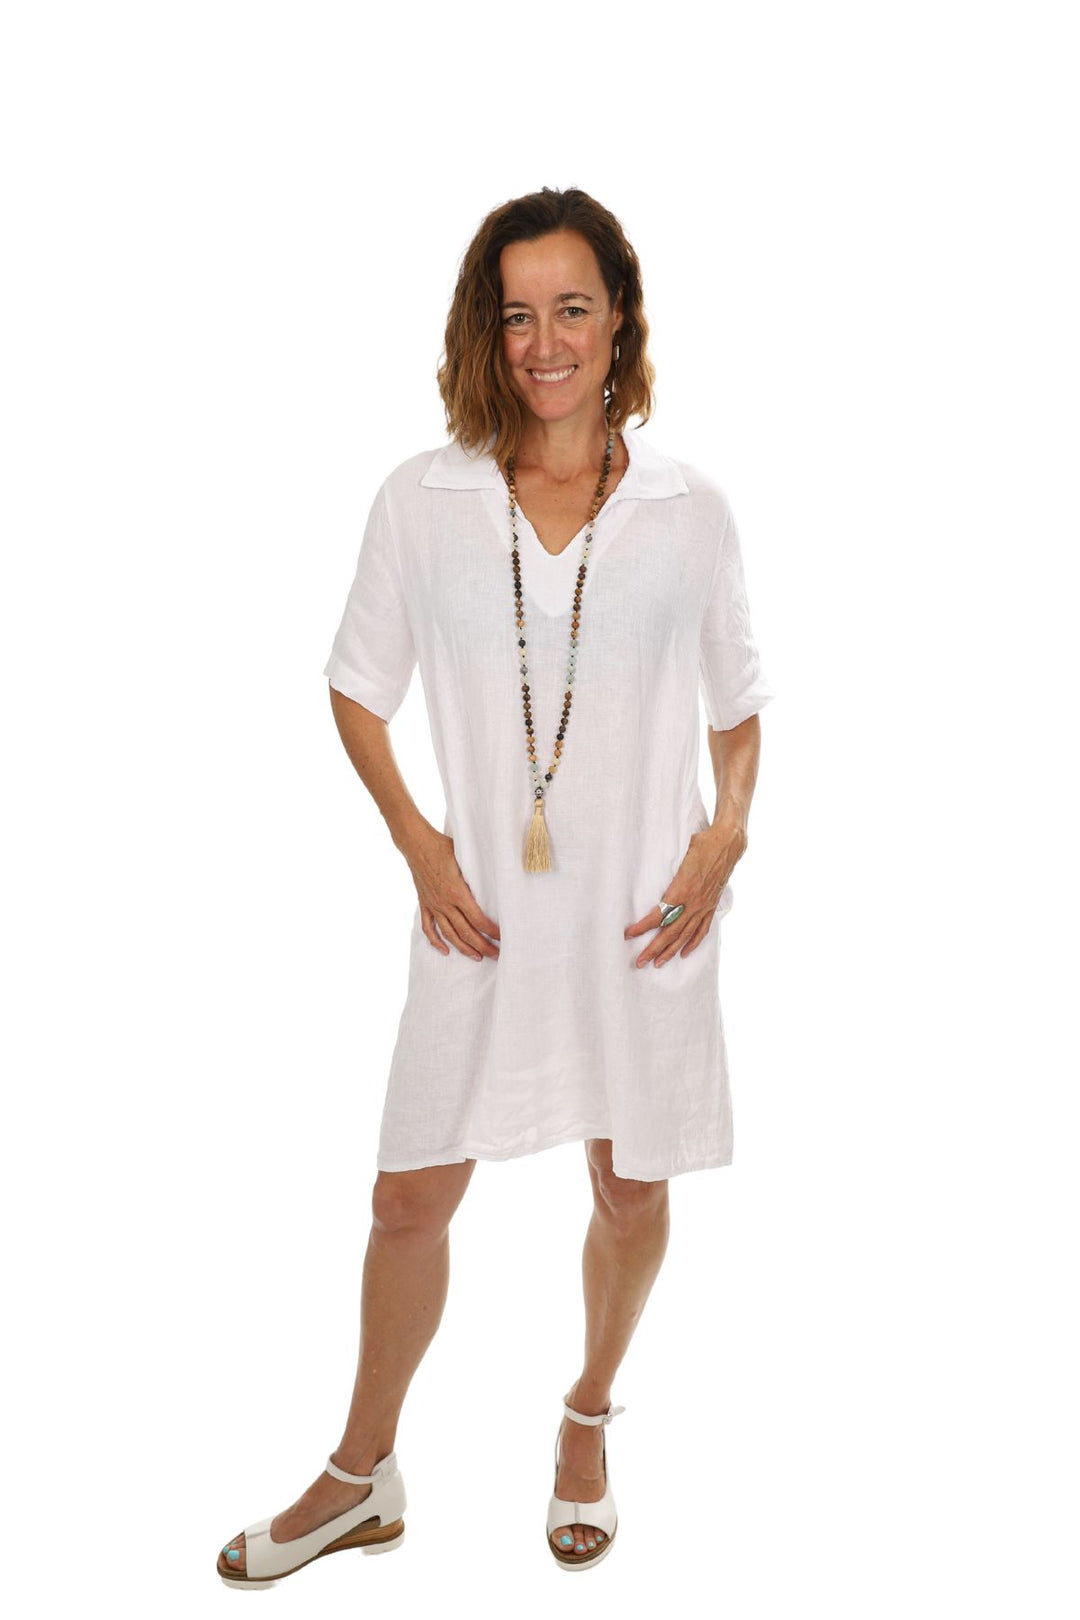 Woman wearing a 100% linen dress by So French SO Chic, sold and shipped from Pizazz Boutique online women's clothes shops Australia